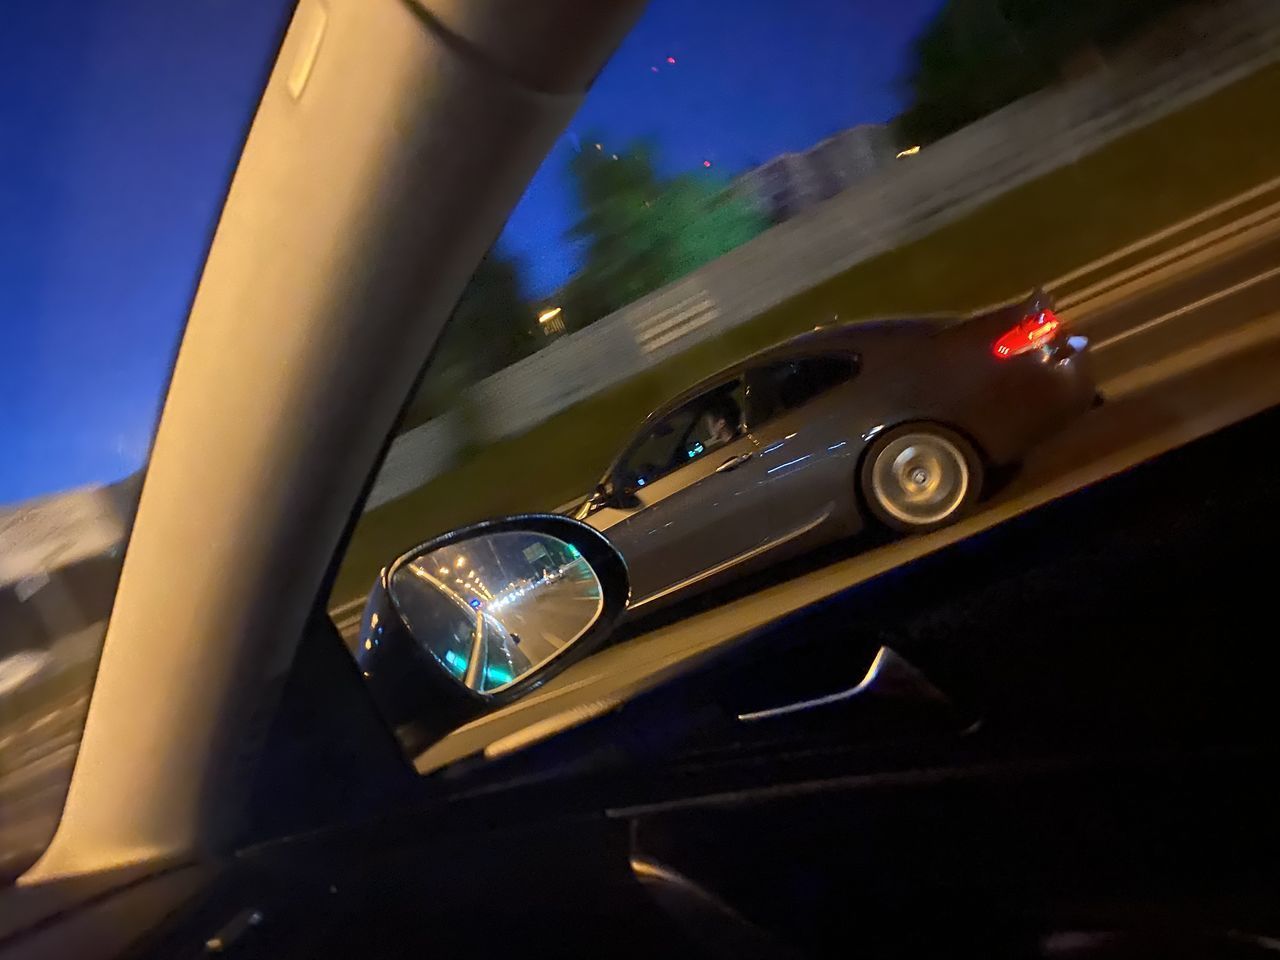 CLOSE-UP OF CAR MOVING ON ROAD IN MIRROR